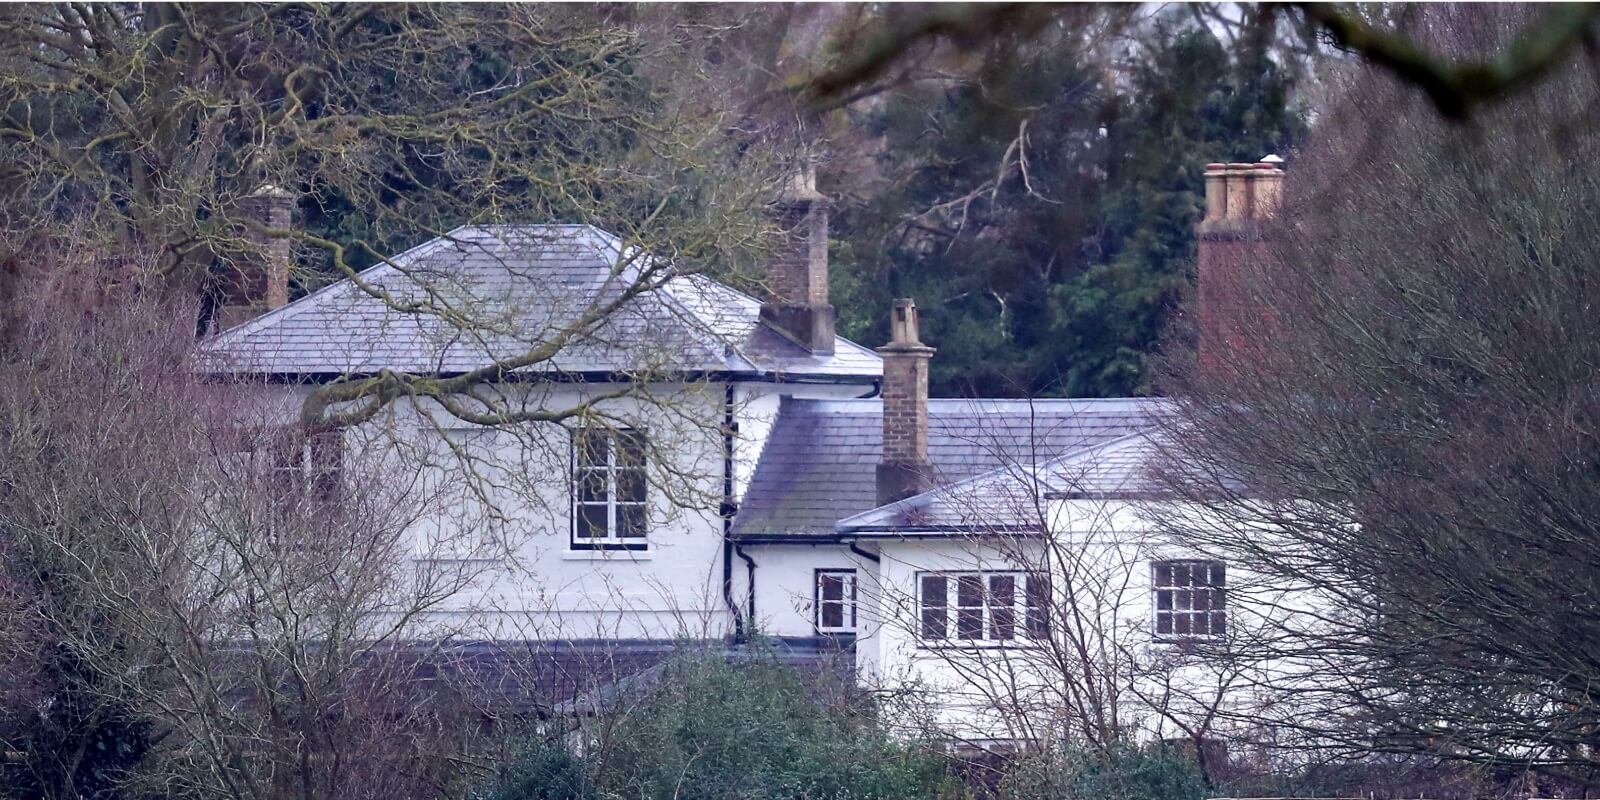 Frogmore Cottage, the former home of Prince Harry and Meghan Markle.